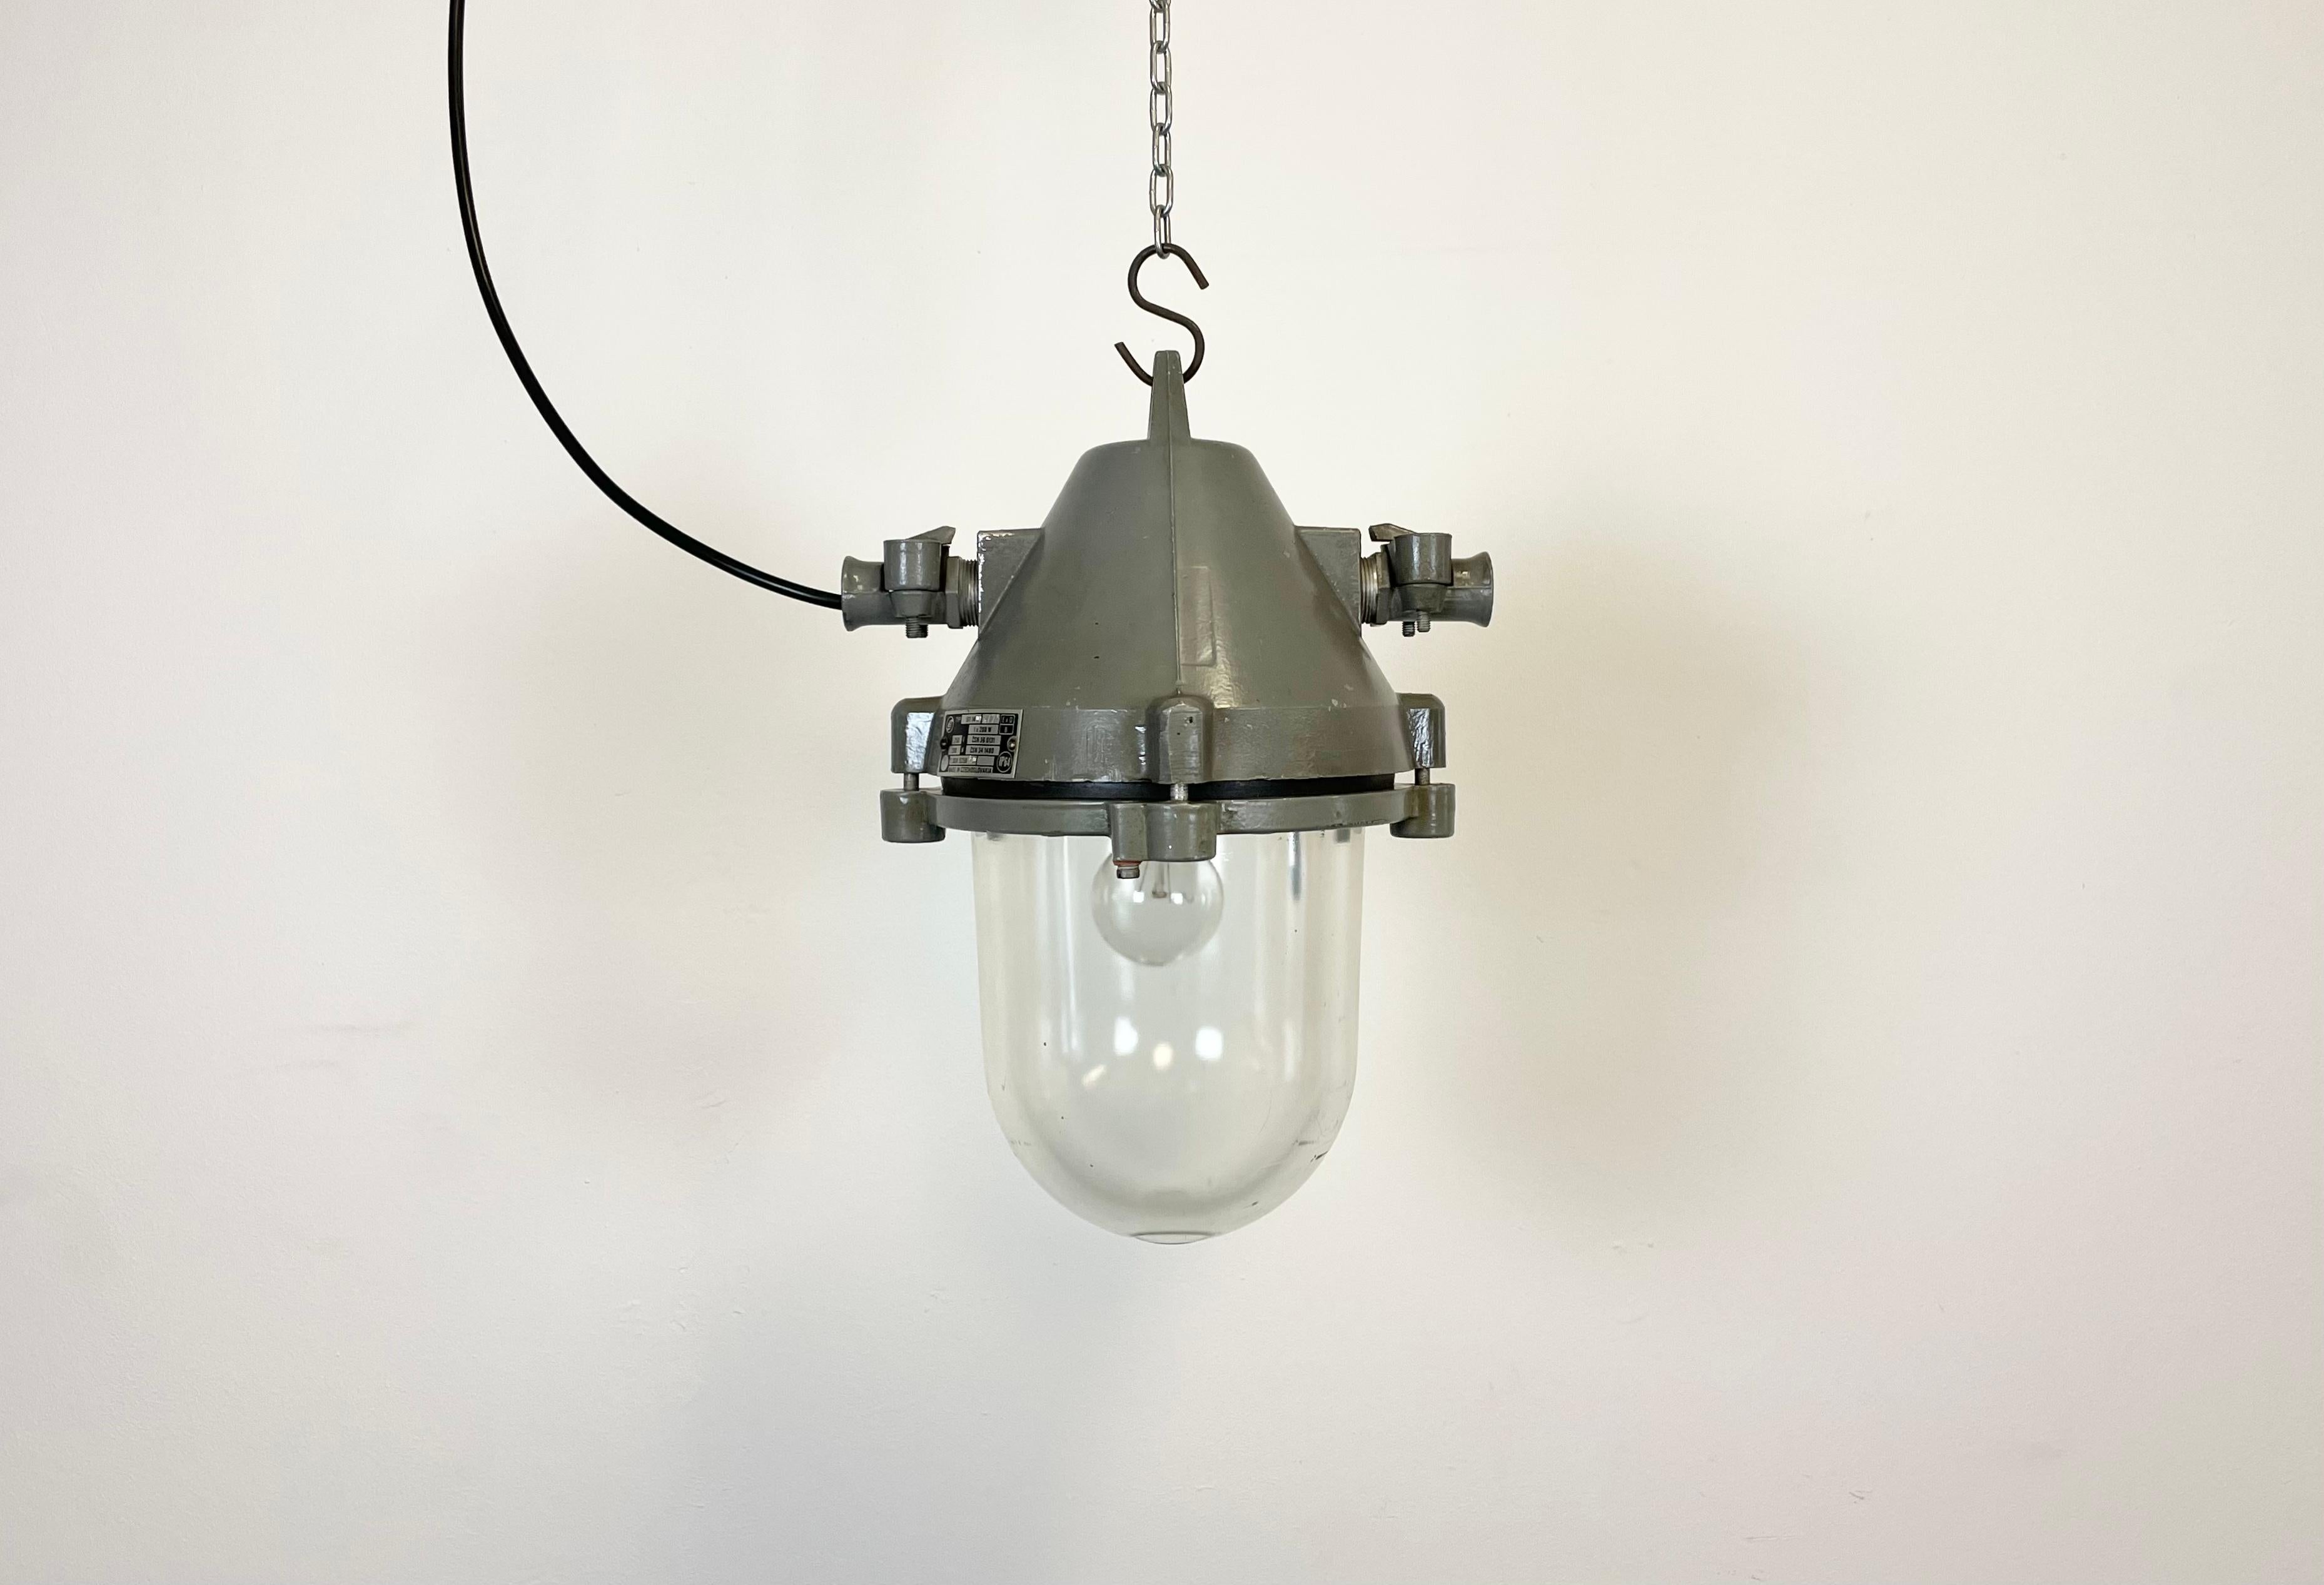 Dark grey industrial explosion proof light with massive protective glass bulb. Made in former Czechoslovakia by Elektrosvit during the 1970s.It features a cast aluminium body and a clear glass cover. Original porcelain socket requires standard E27/